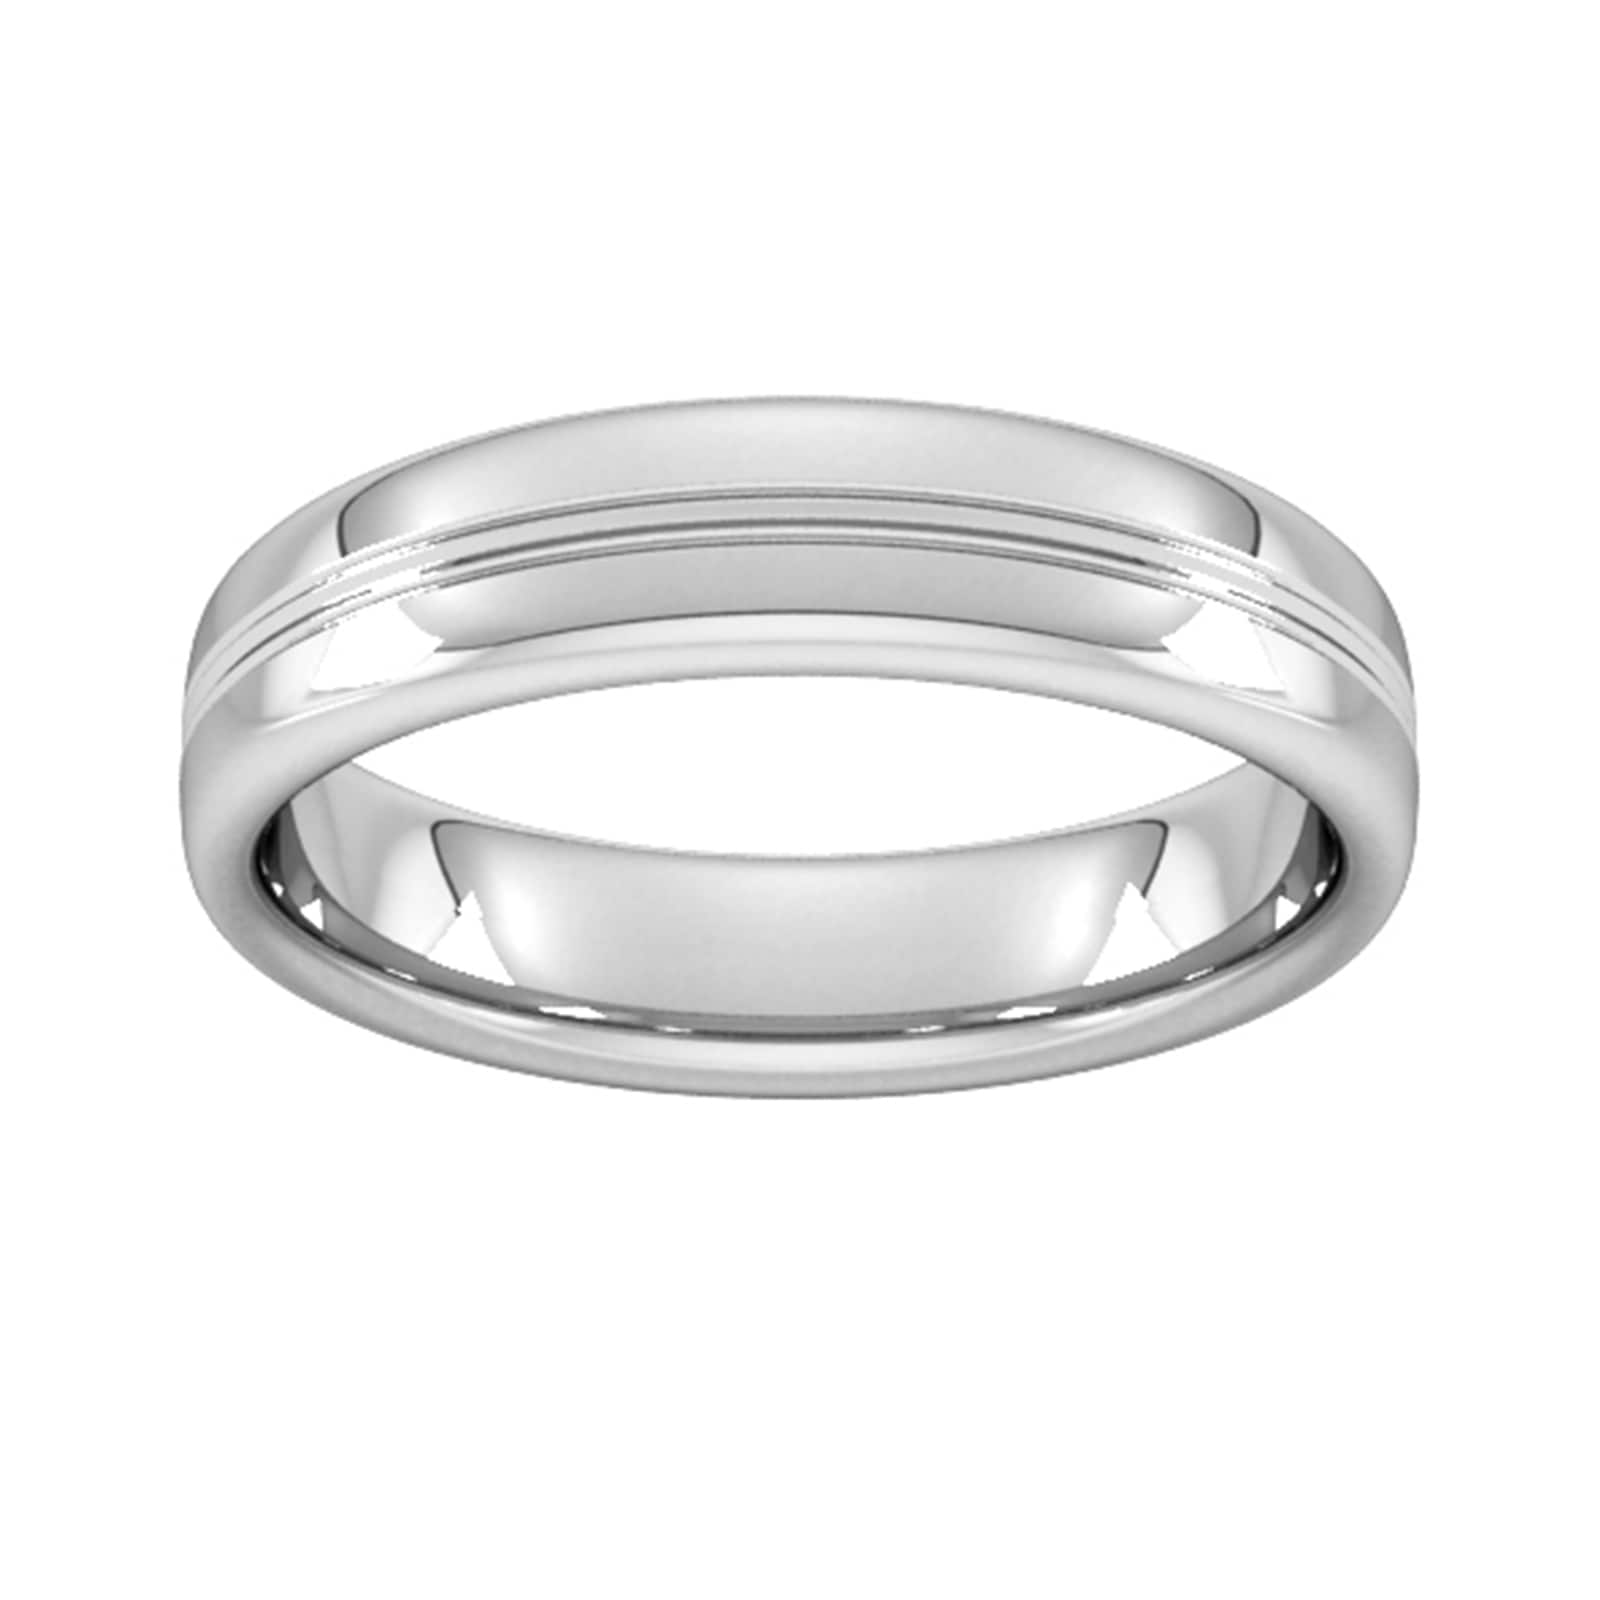 5mm Slight Court Extra Heavy Grooved Polished Finish Wedding Ring In 950 Palladium - Ring Size G